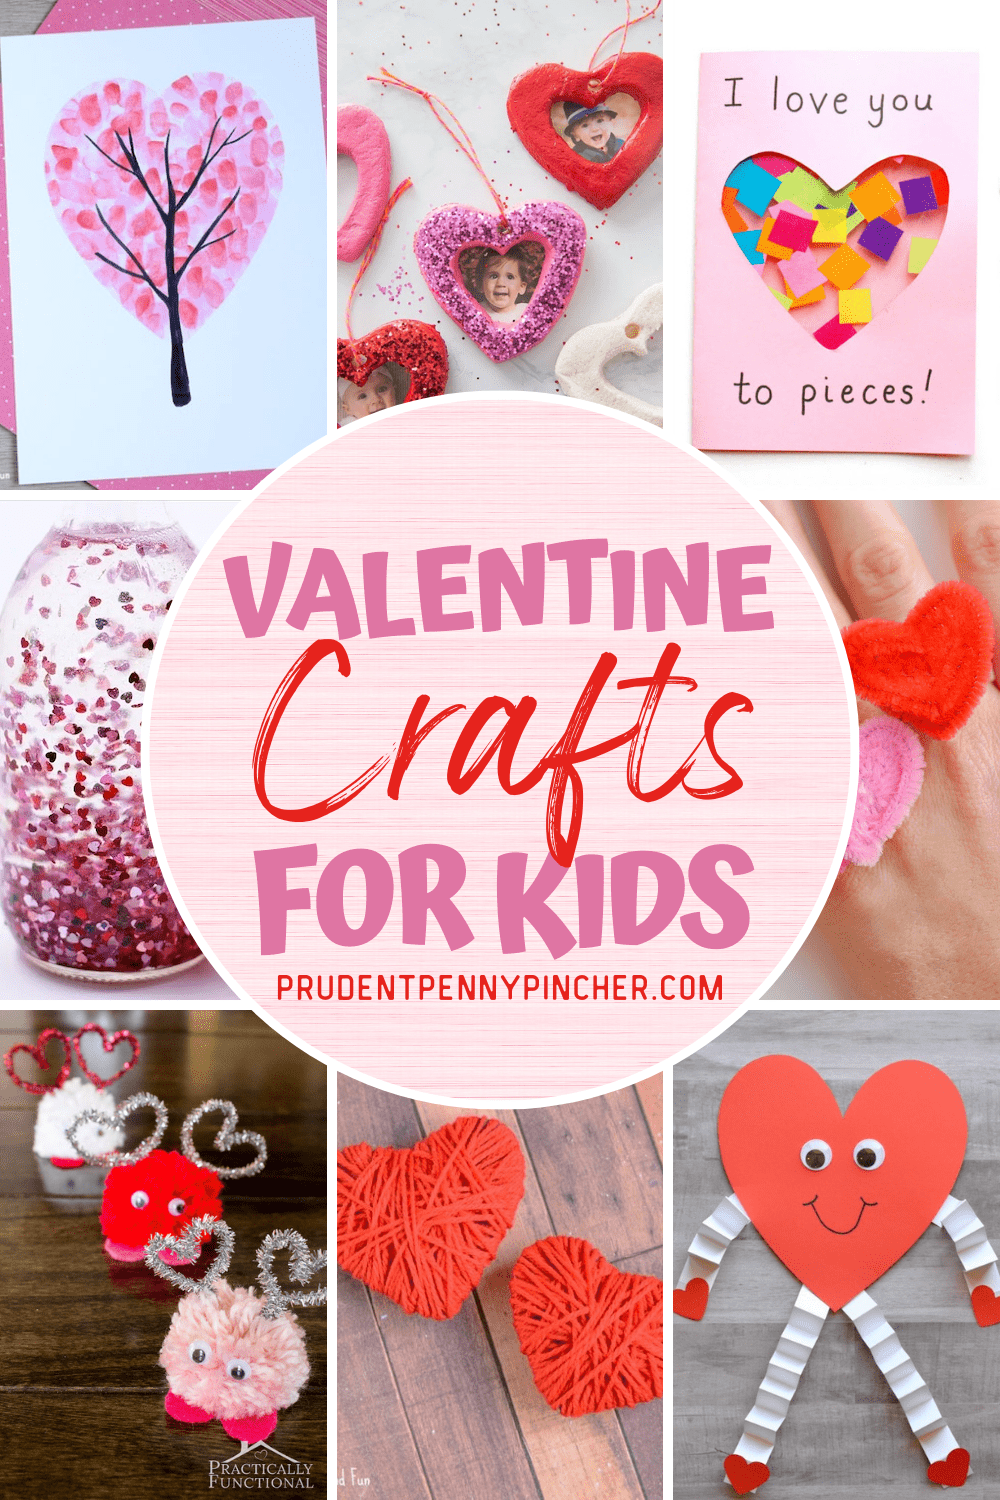 DIY Projects For Teens Who Love To Craft, Easy DIY Projects